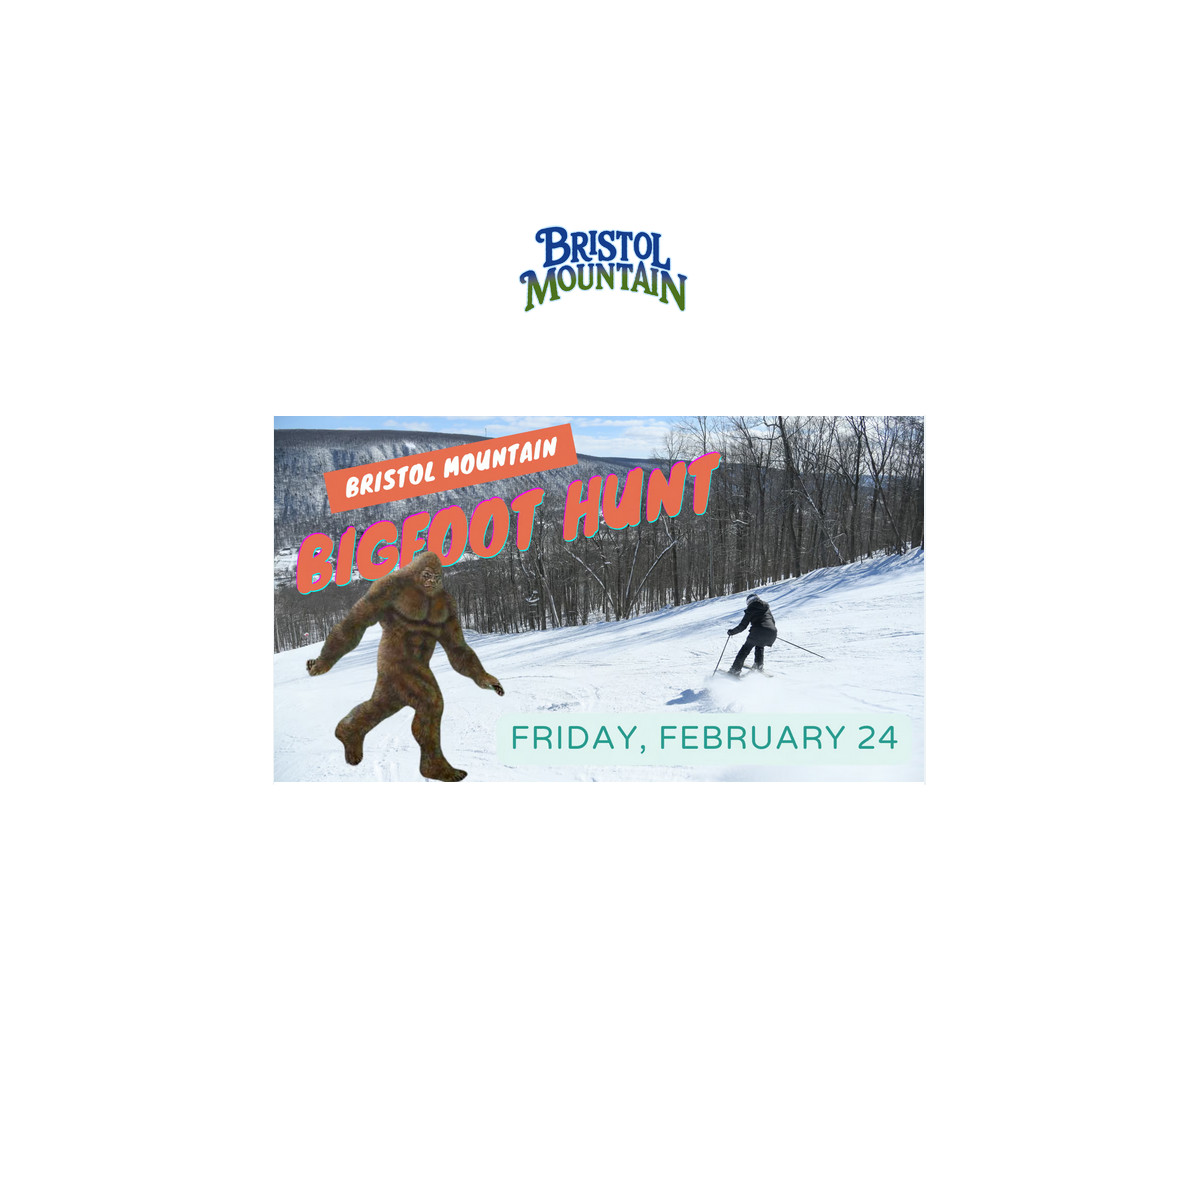 Bigfoot at Bristol Mountain with skier February 24th